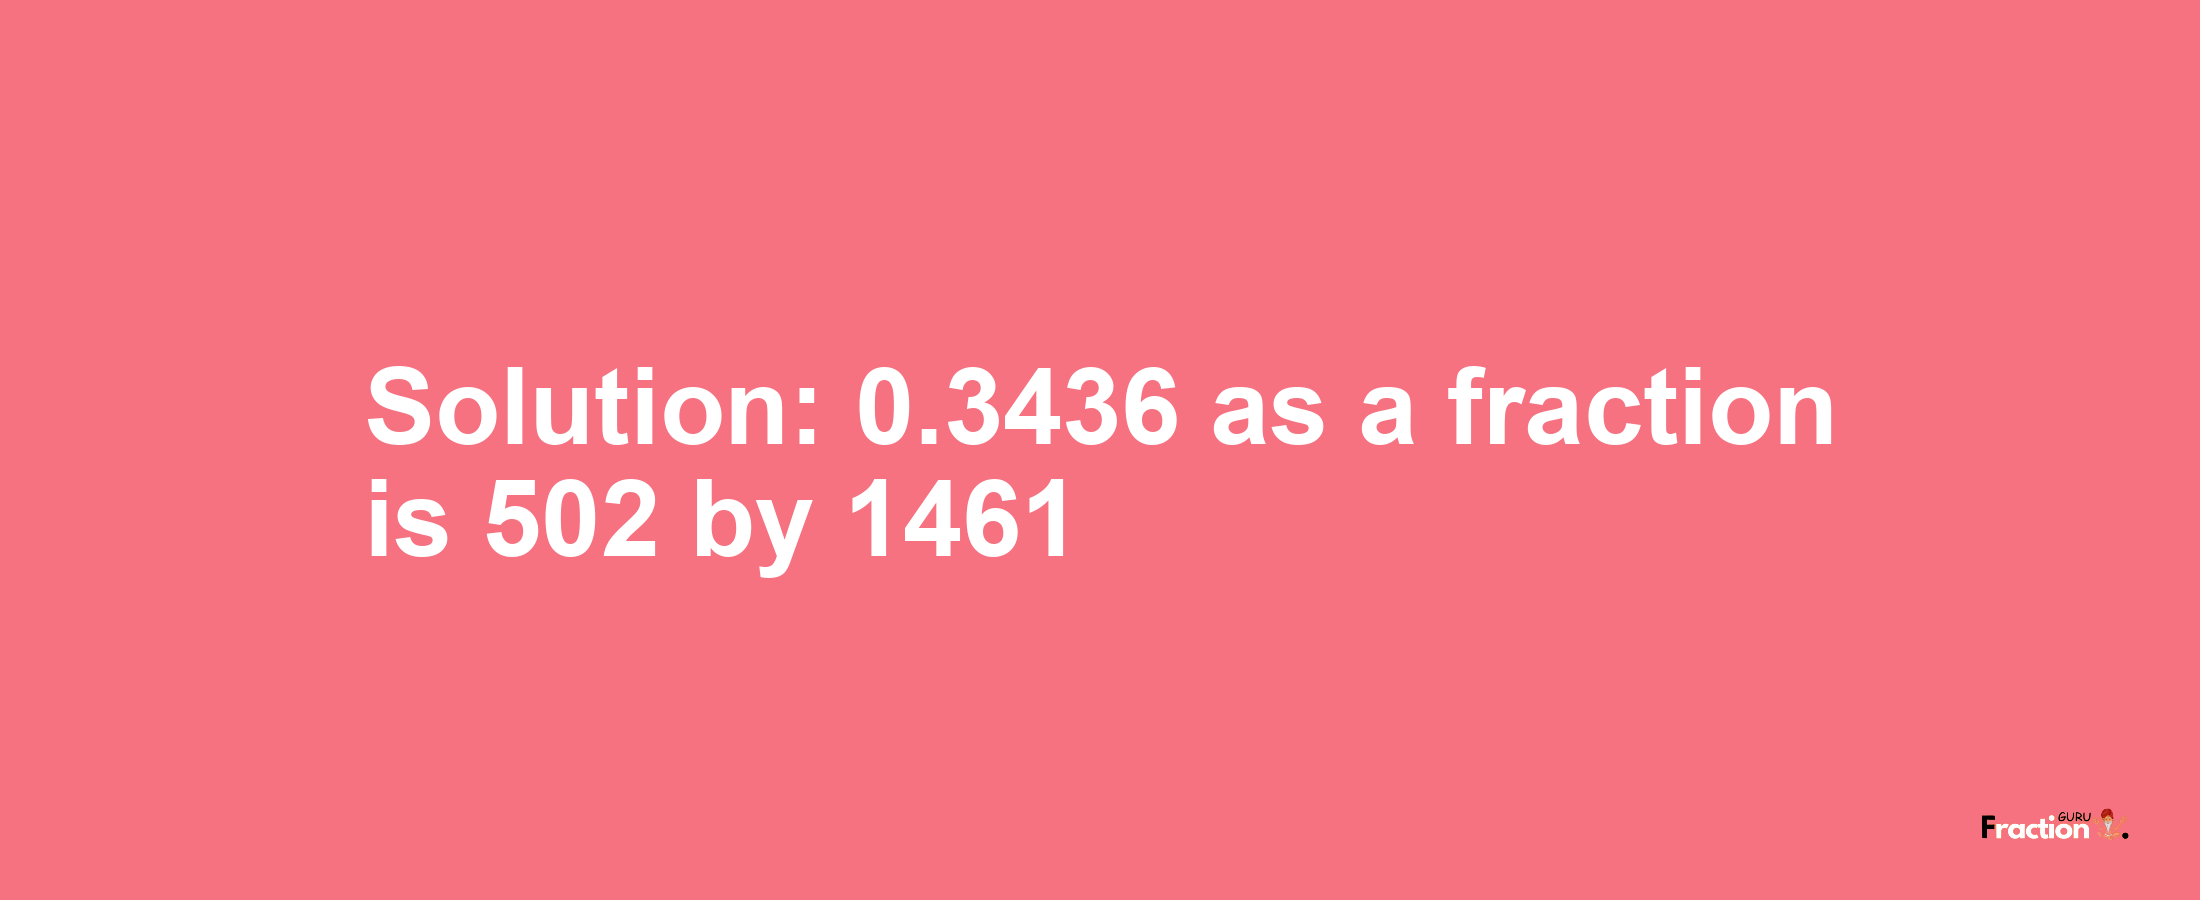 Solution:0.3436 as a fraction is 502/1461